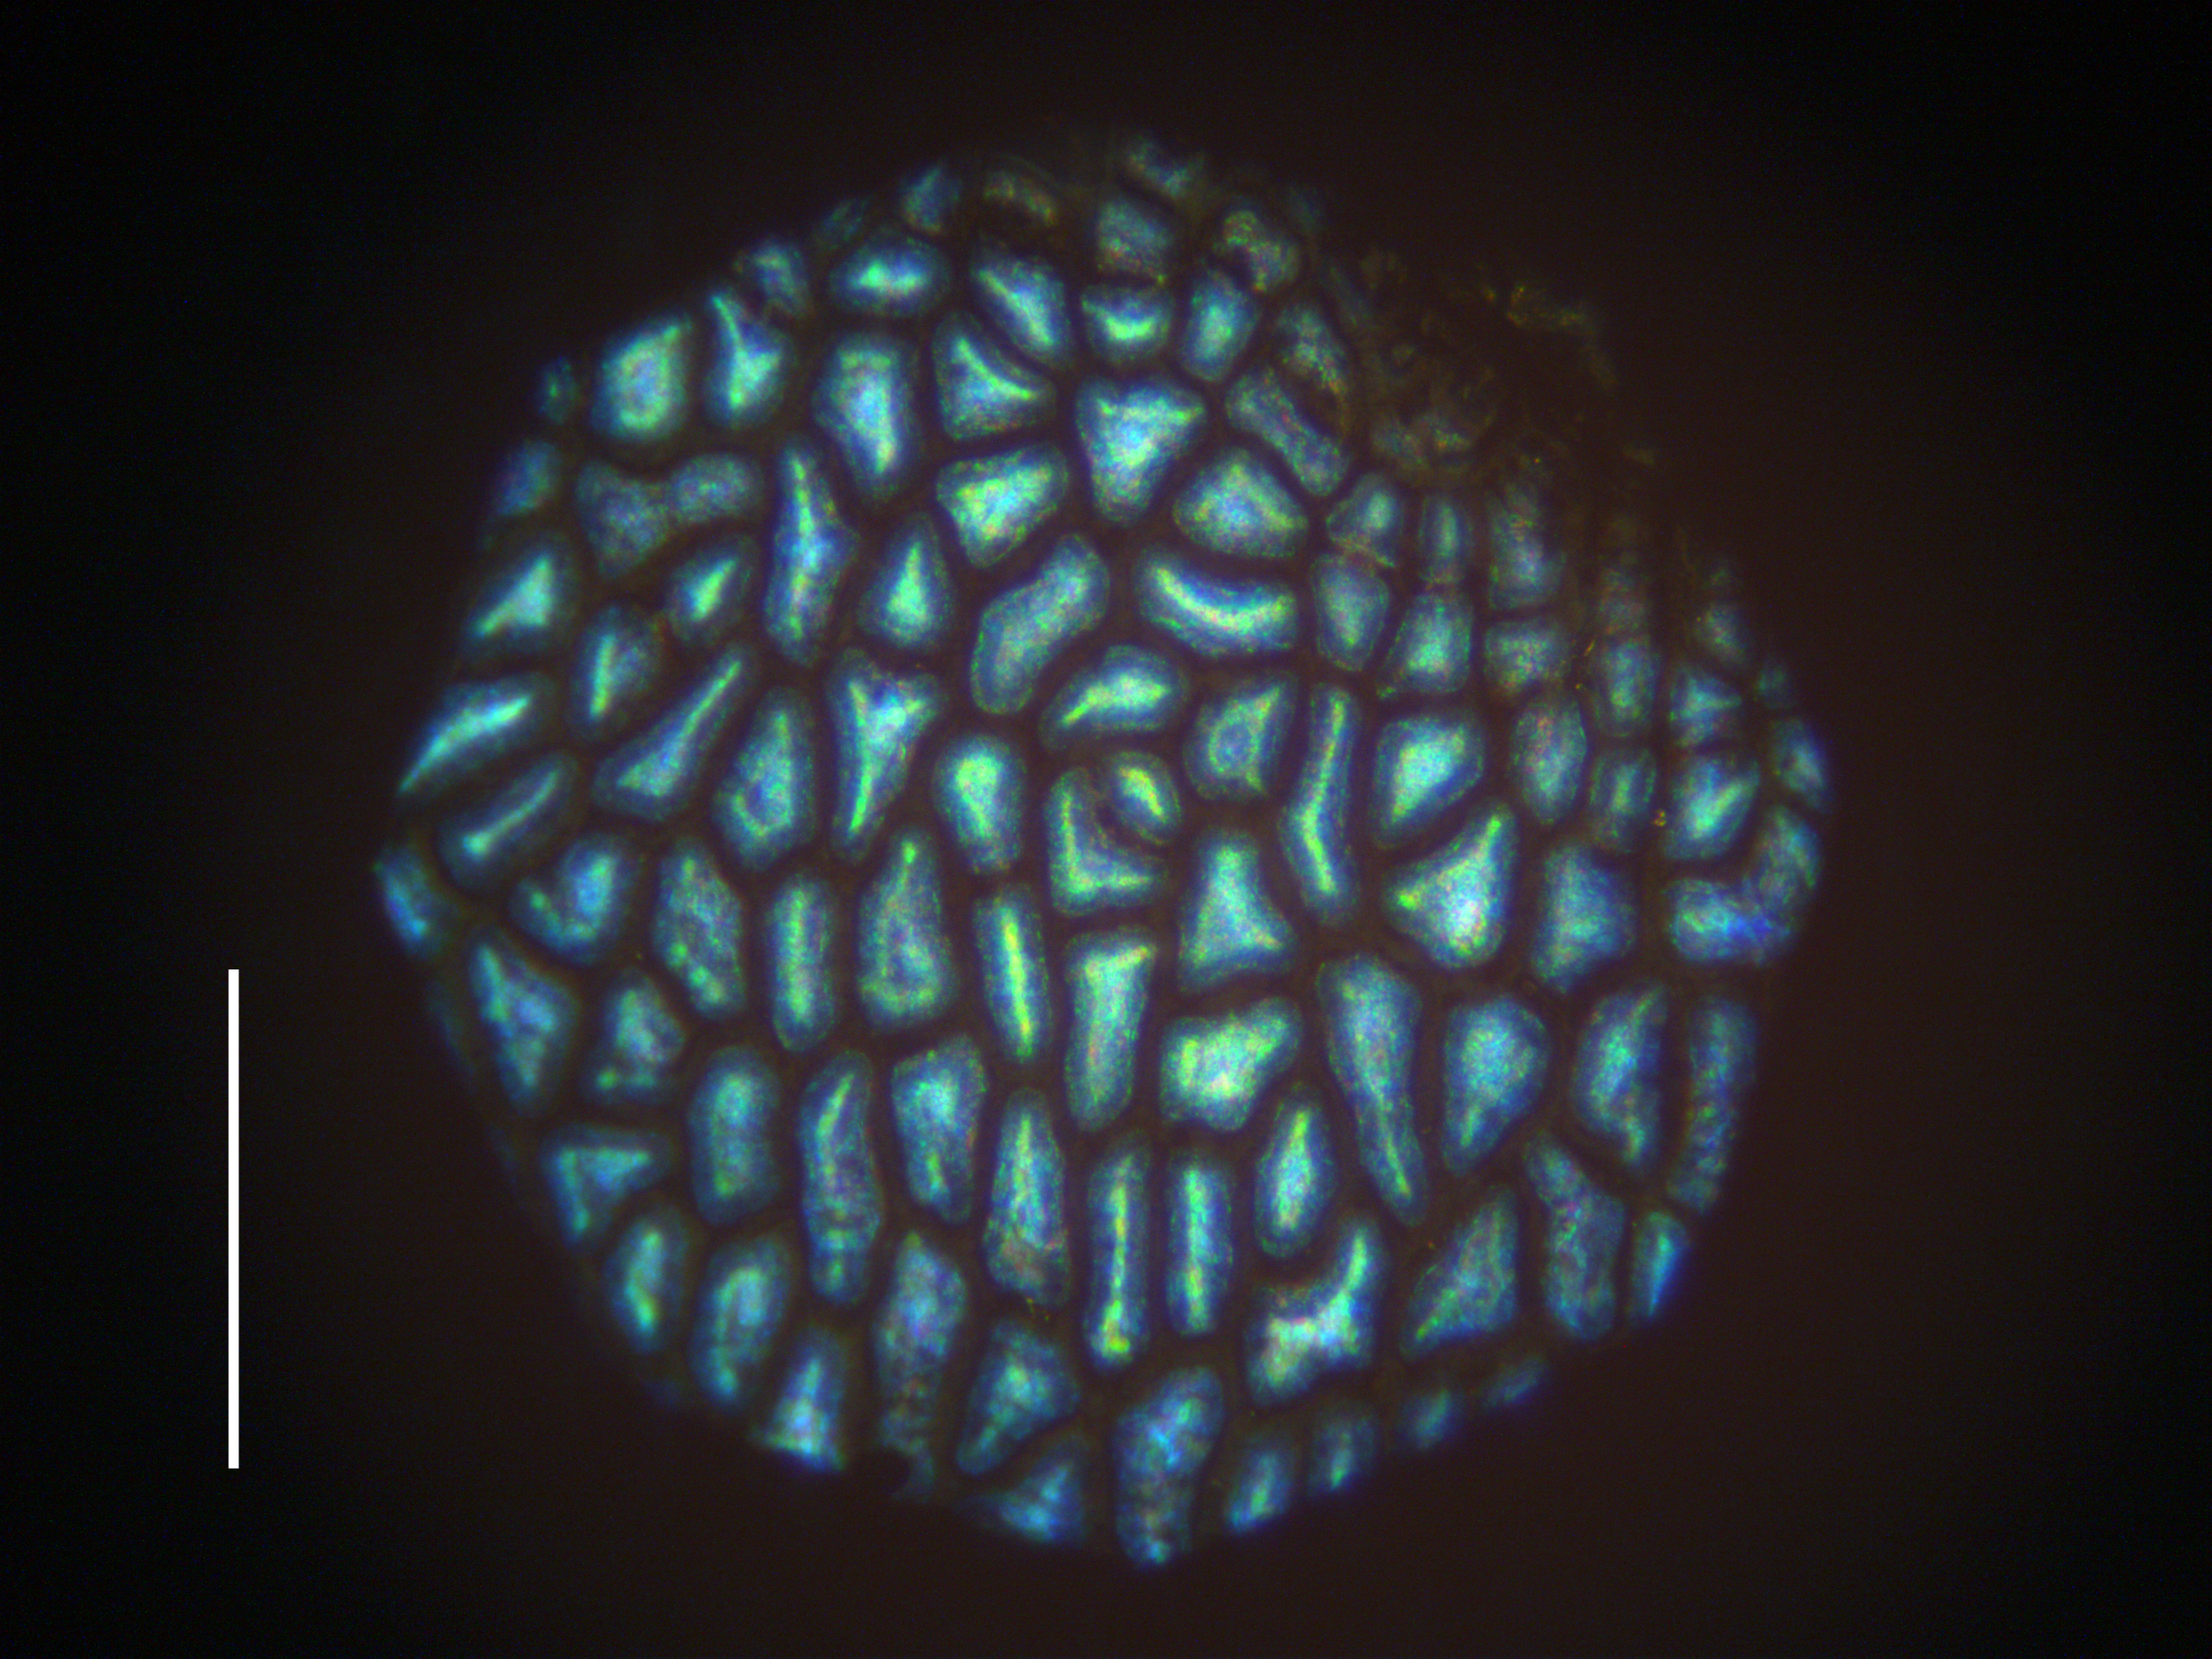 A microscopic look at the fruit's surface in reflected light